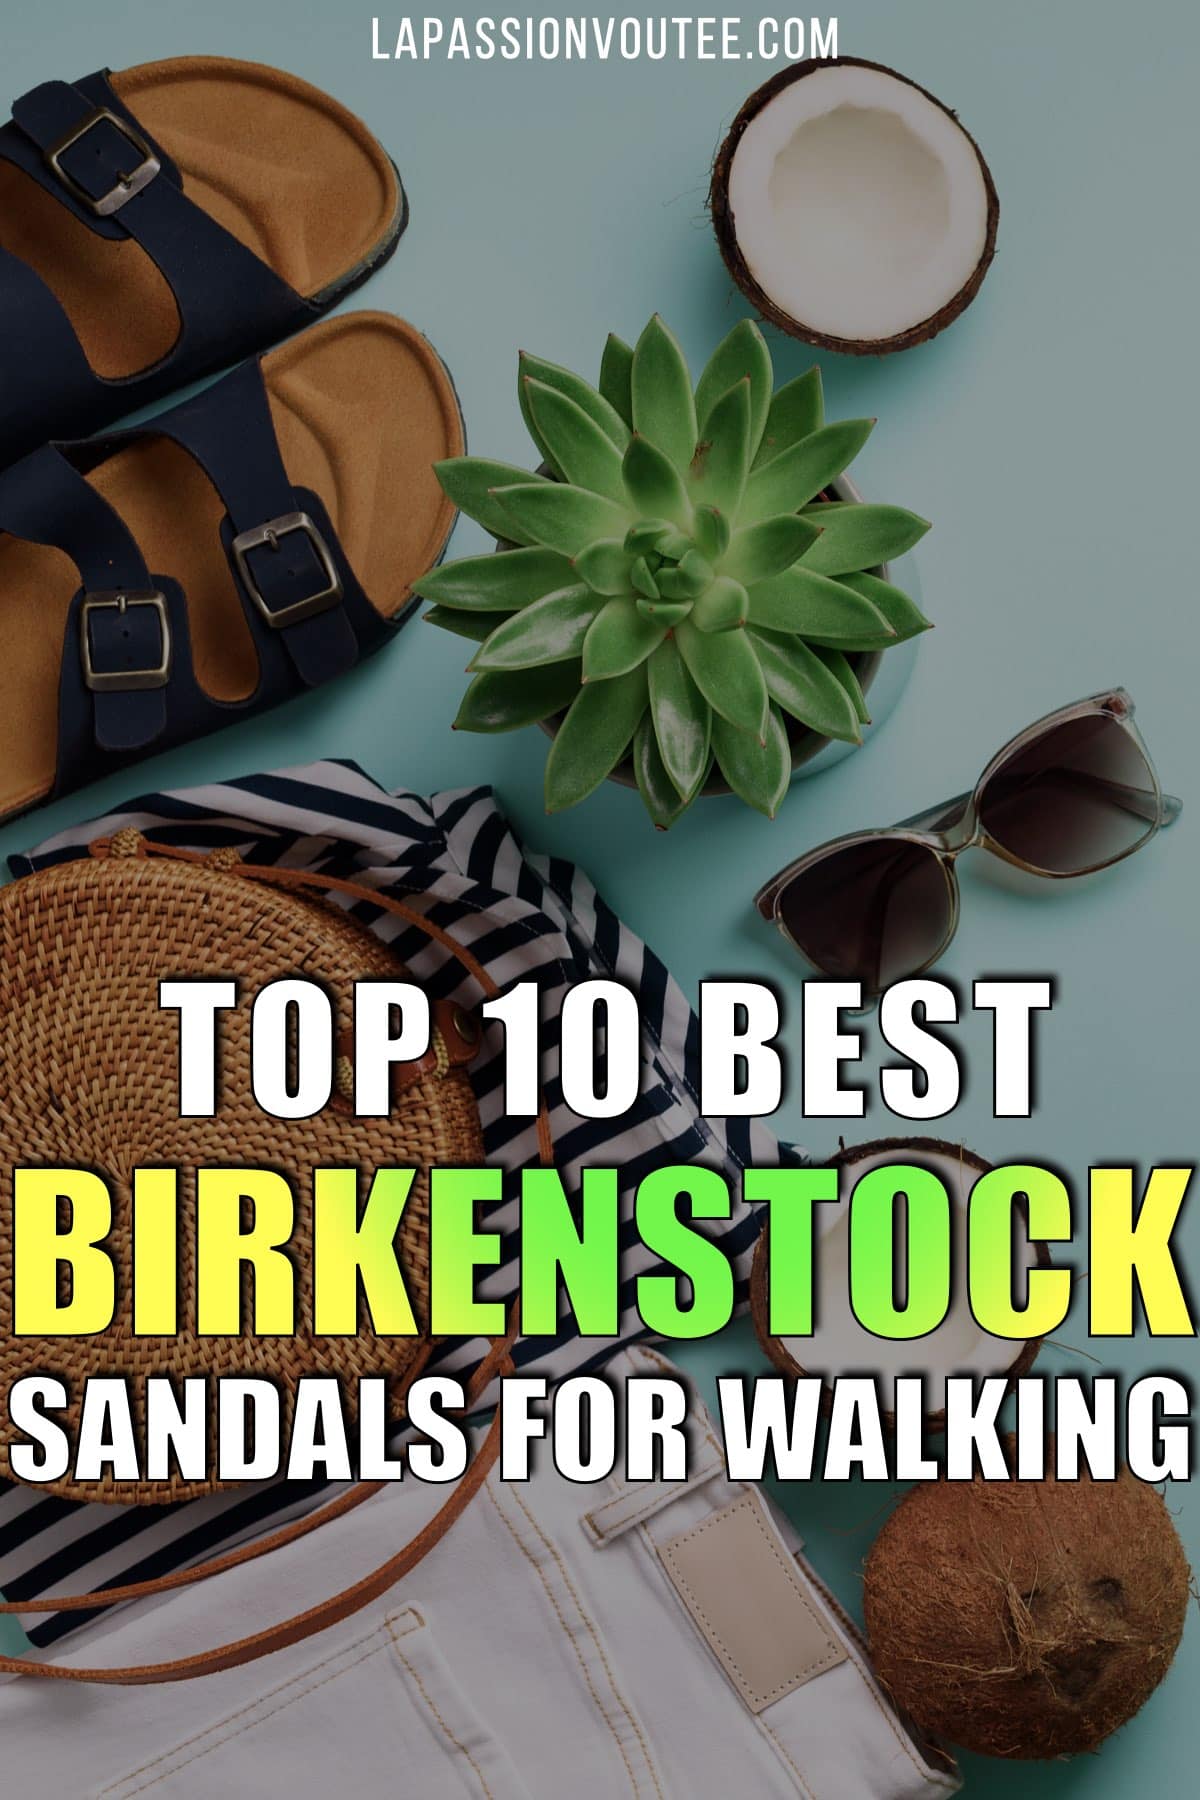 Are Birkenstocks good for walking? A detailed guide on the best Birkenstock sandals for women that are comfortable and good for walking.